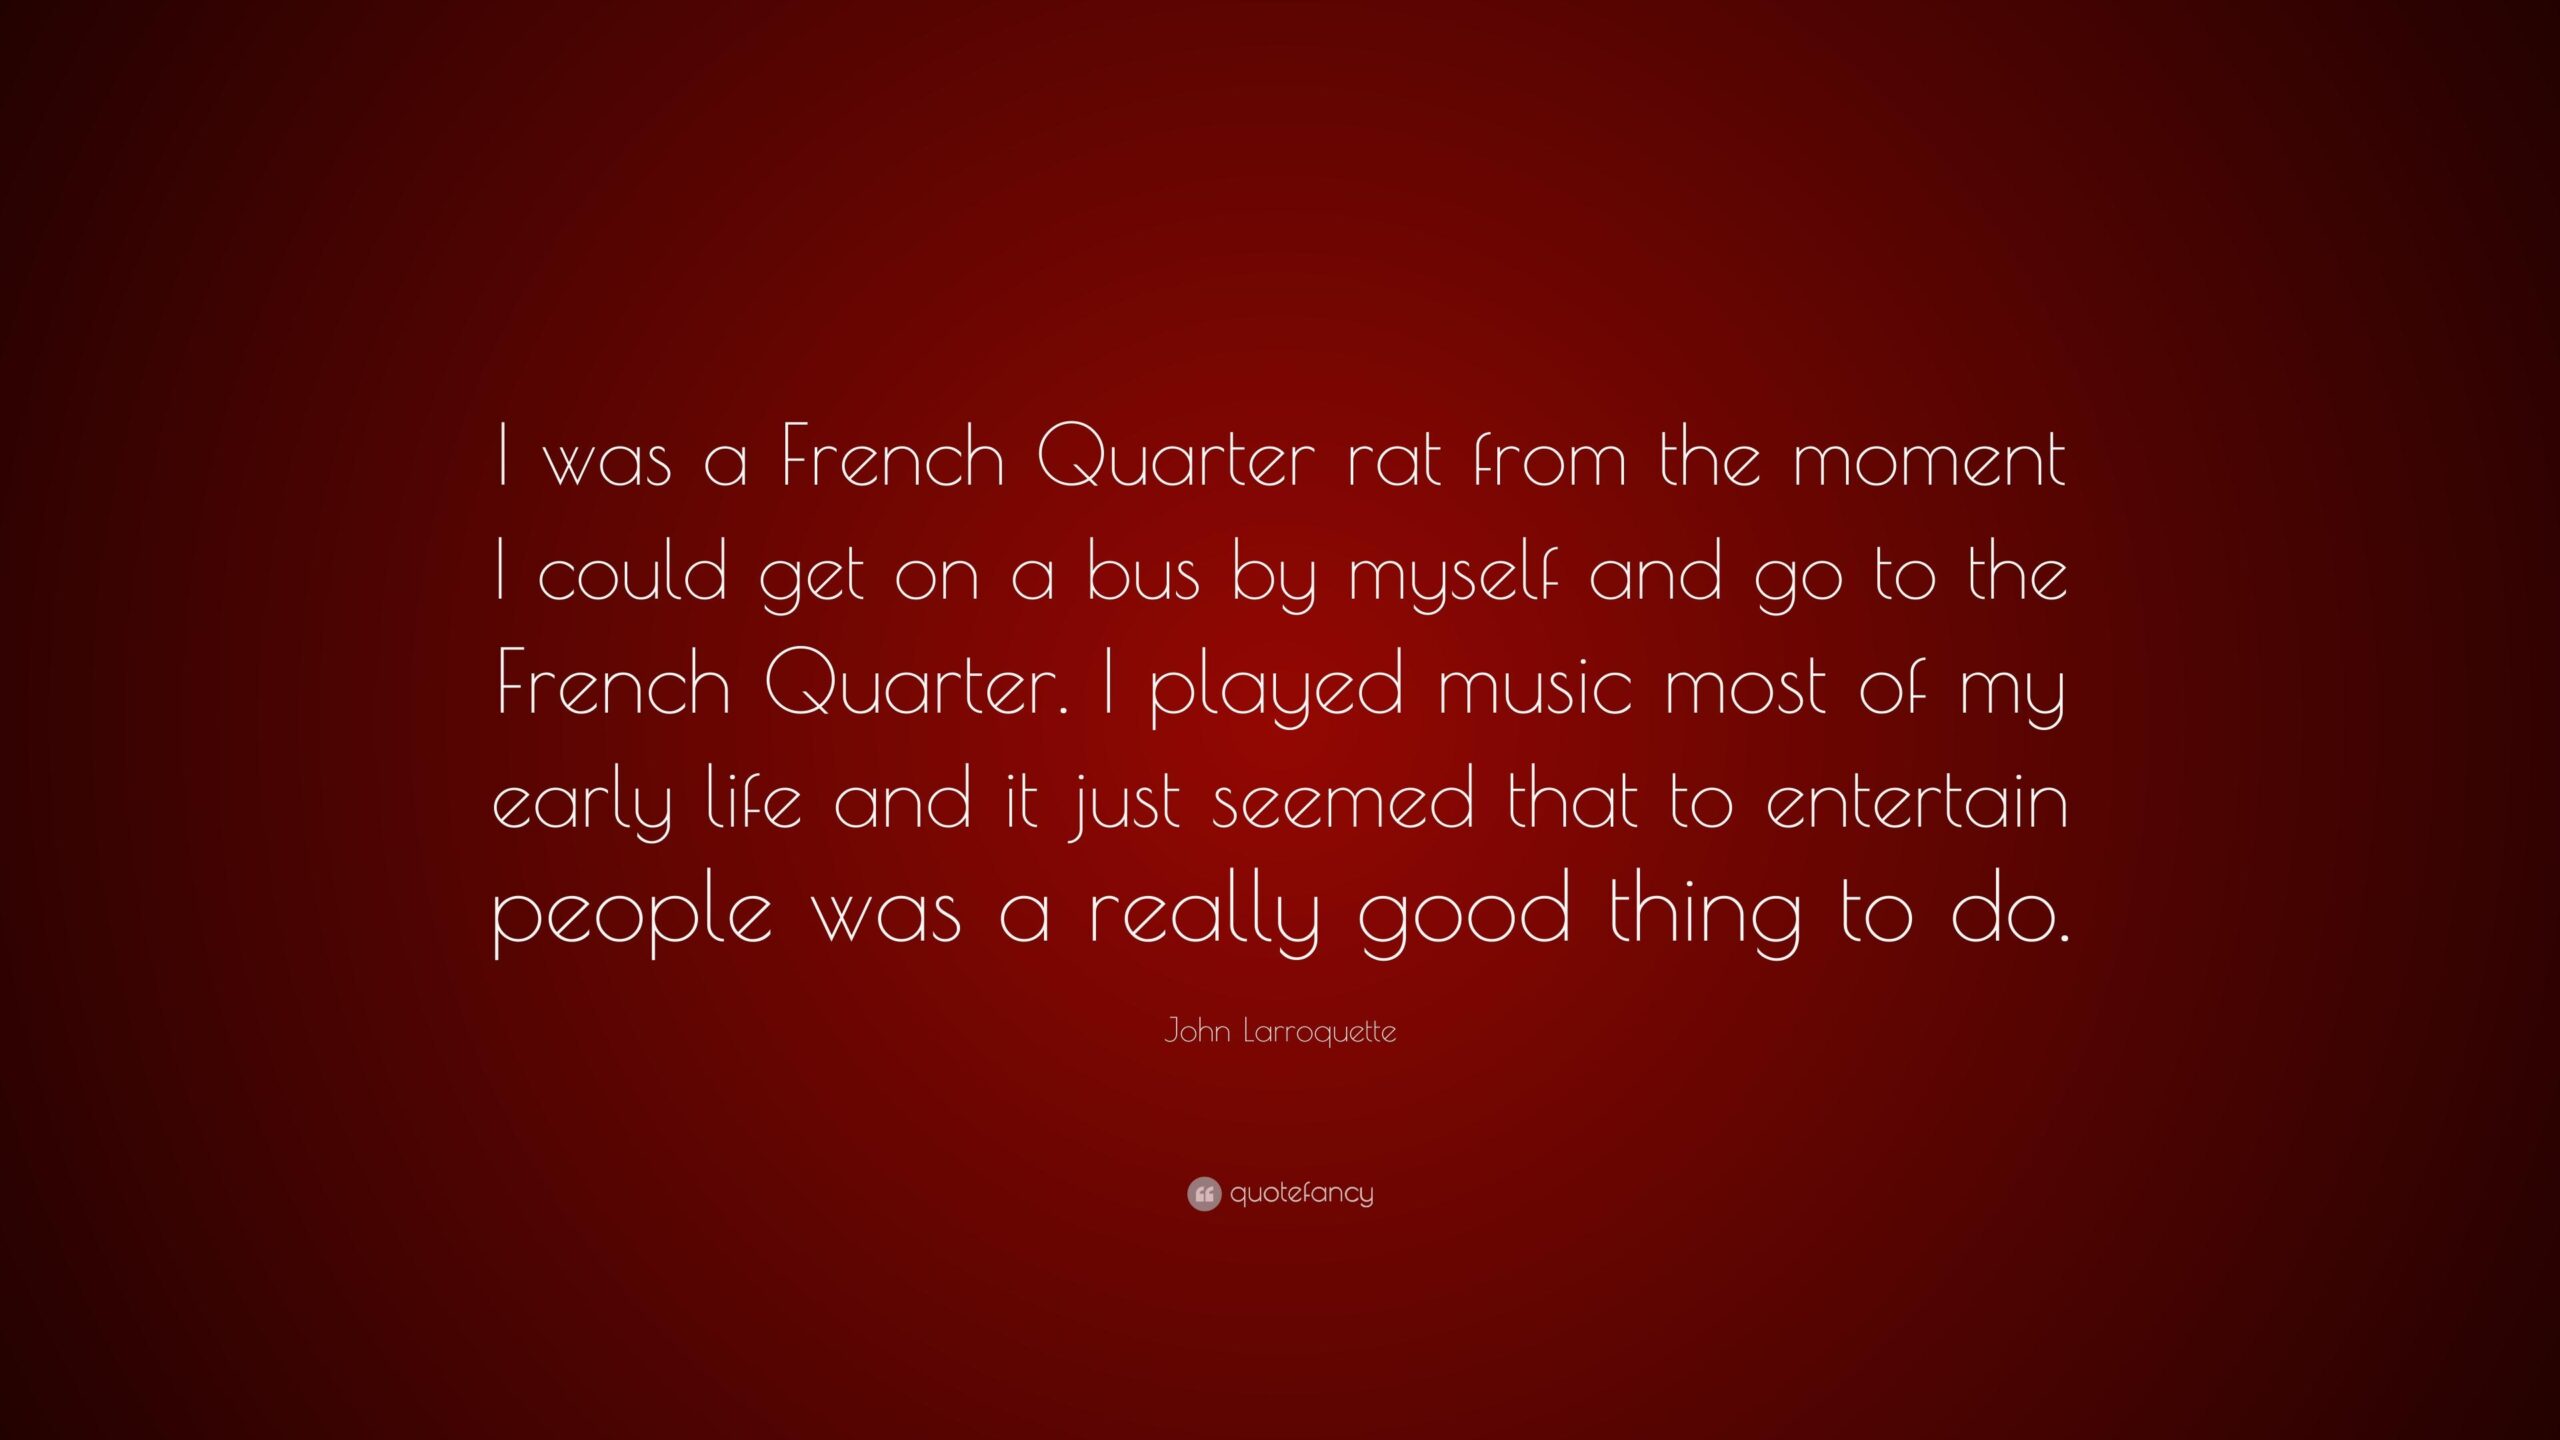 John Larroquette Quote “I was a French Quarter rat from the moment